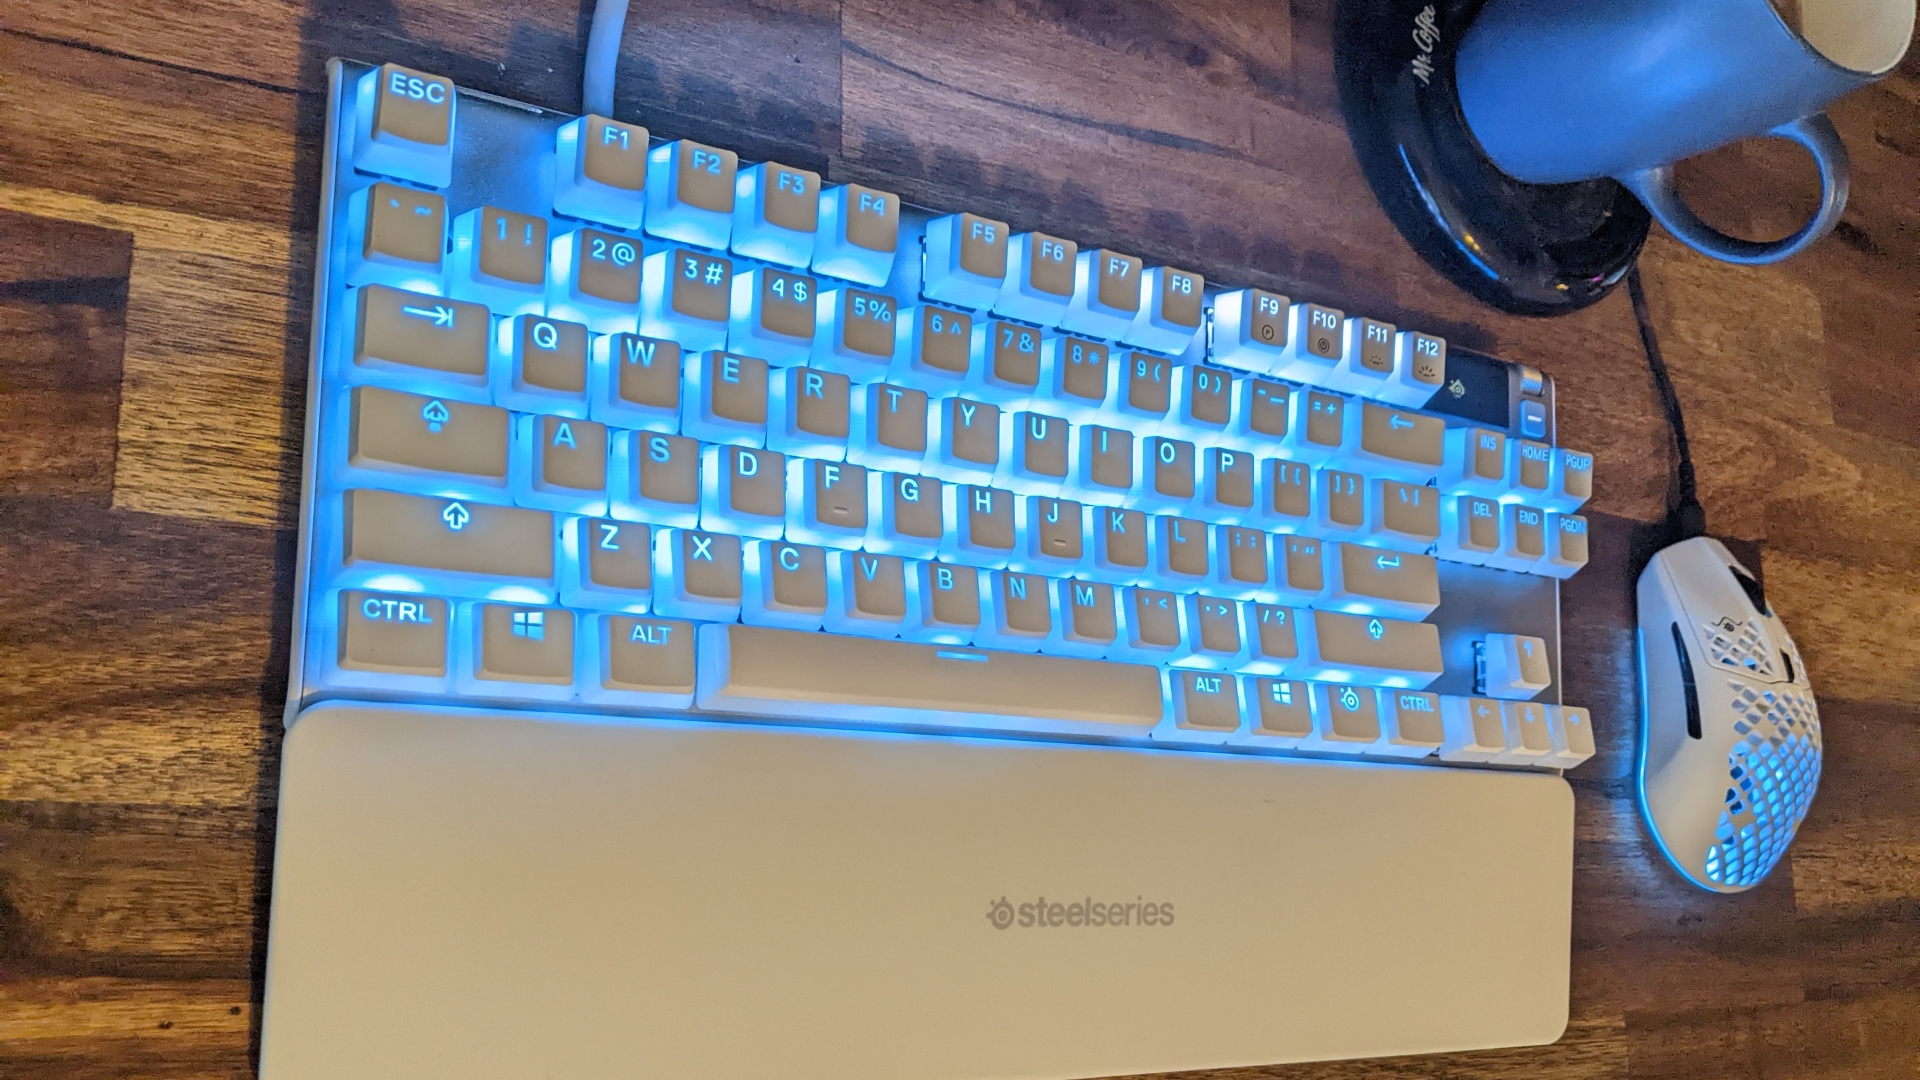 Lauren's matching keyboard and mouse, glowing a subtle blue